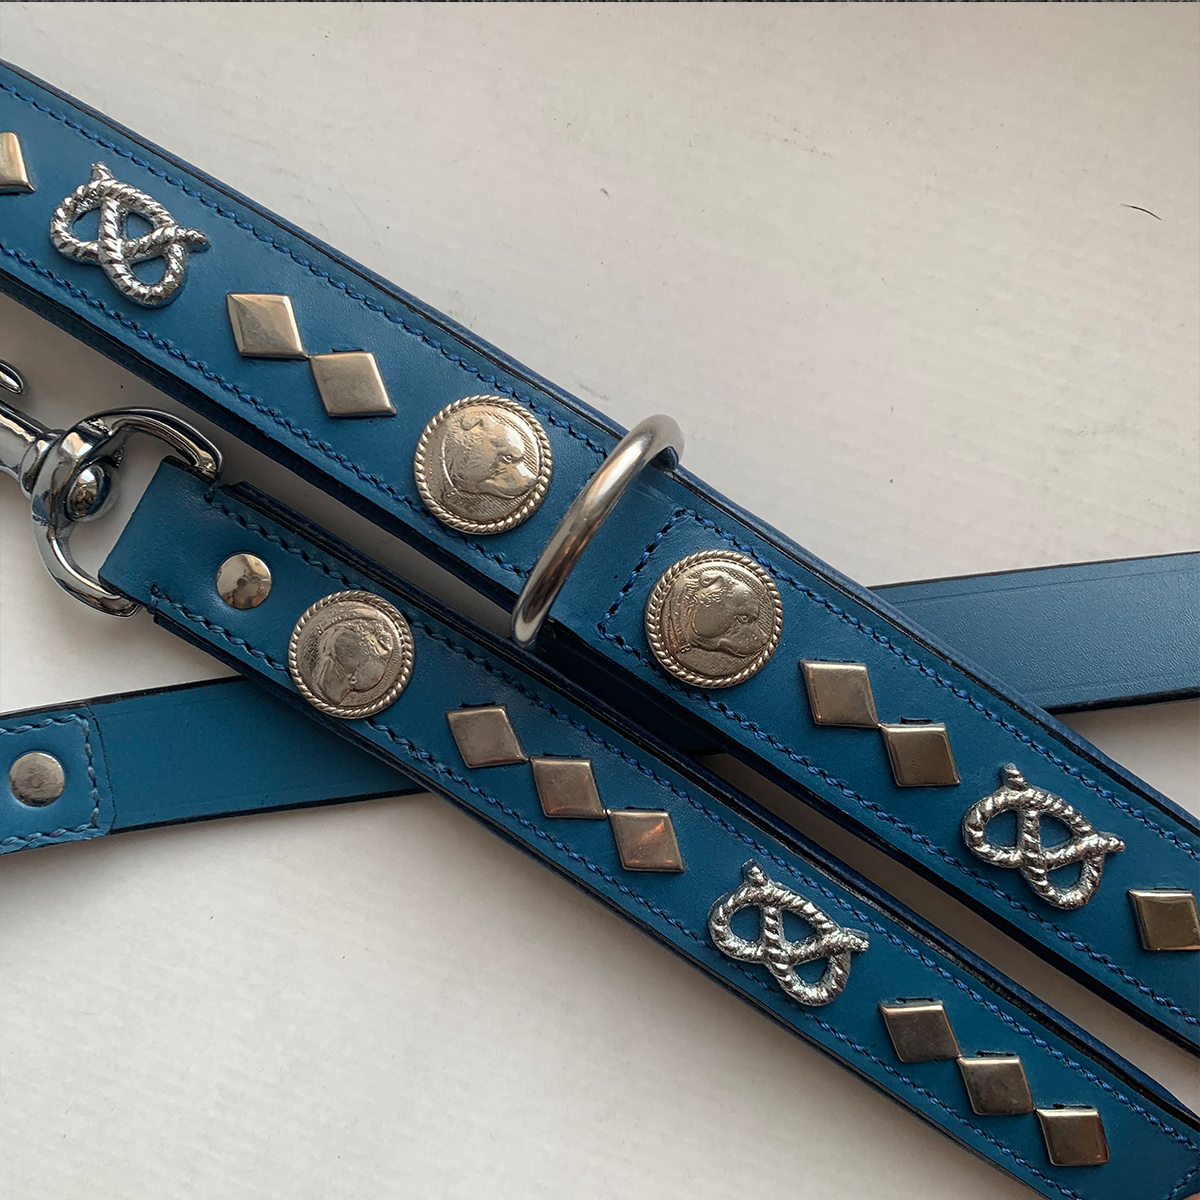 Staffordshire Bull Terrier Leather Collar